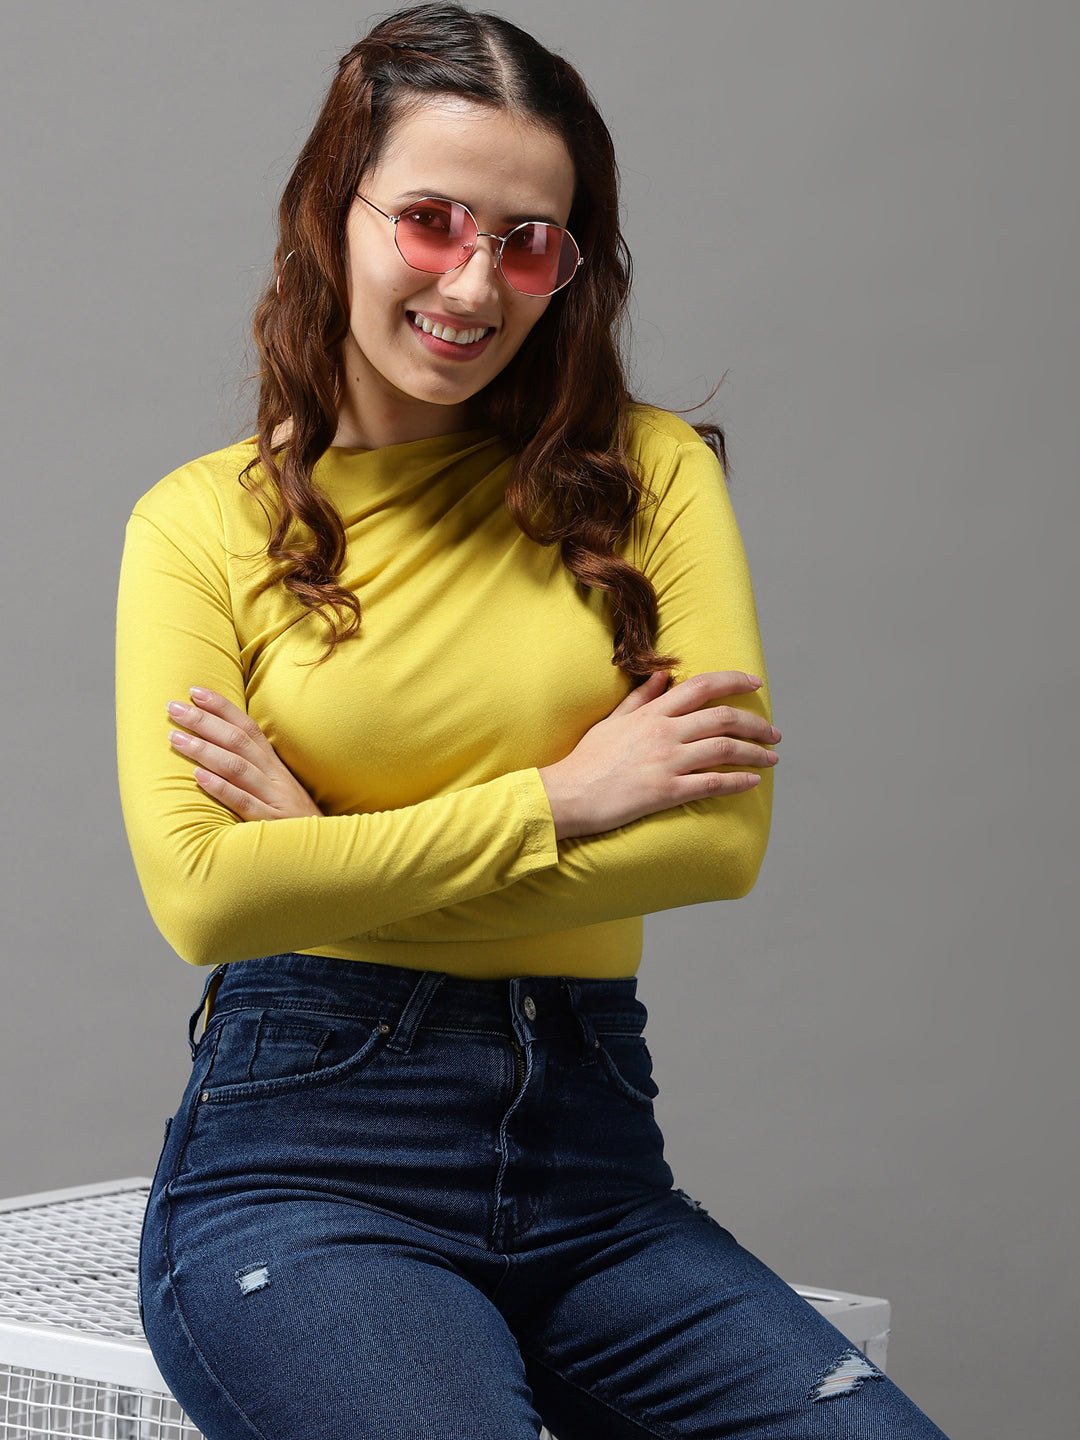 Women High Neck Solid Yellow Fitted Top